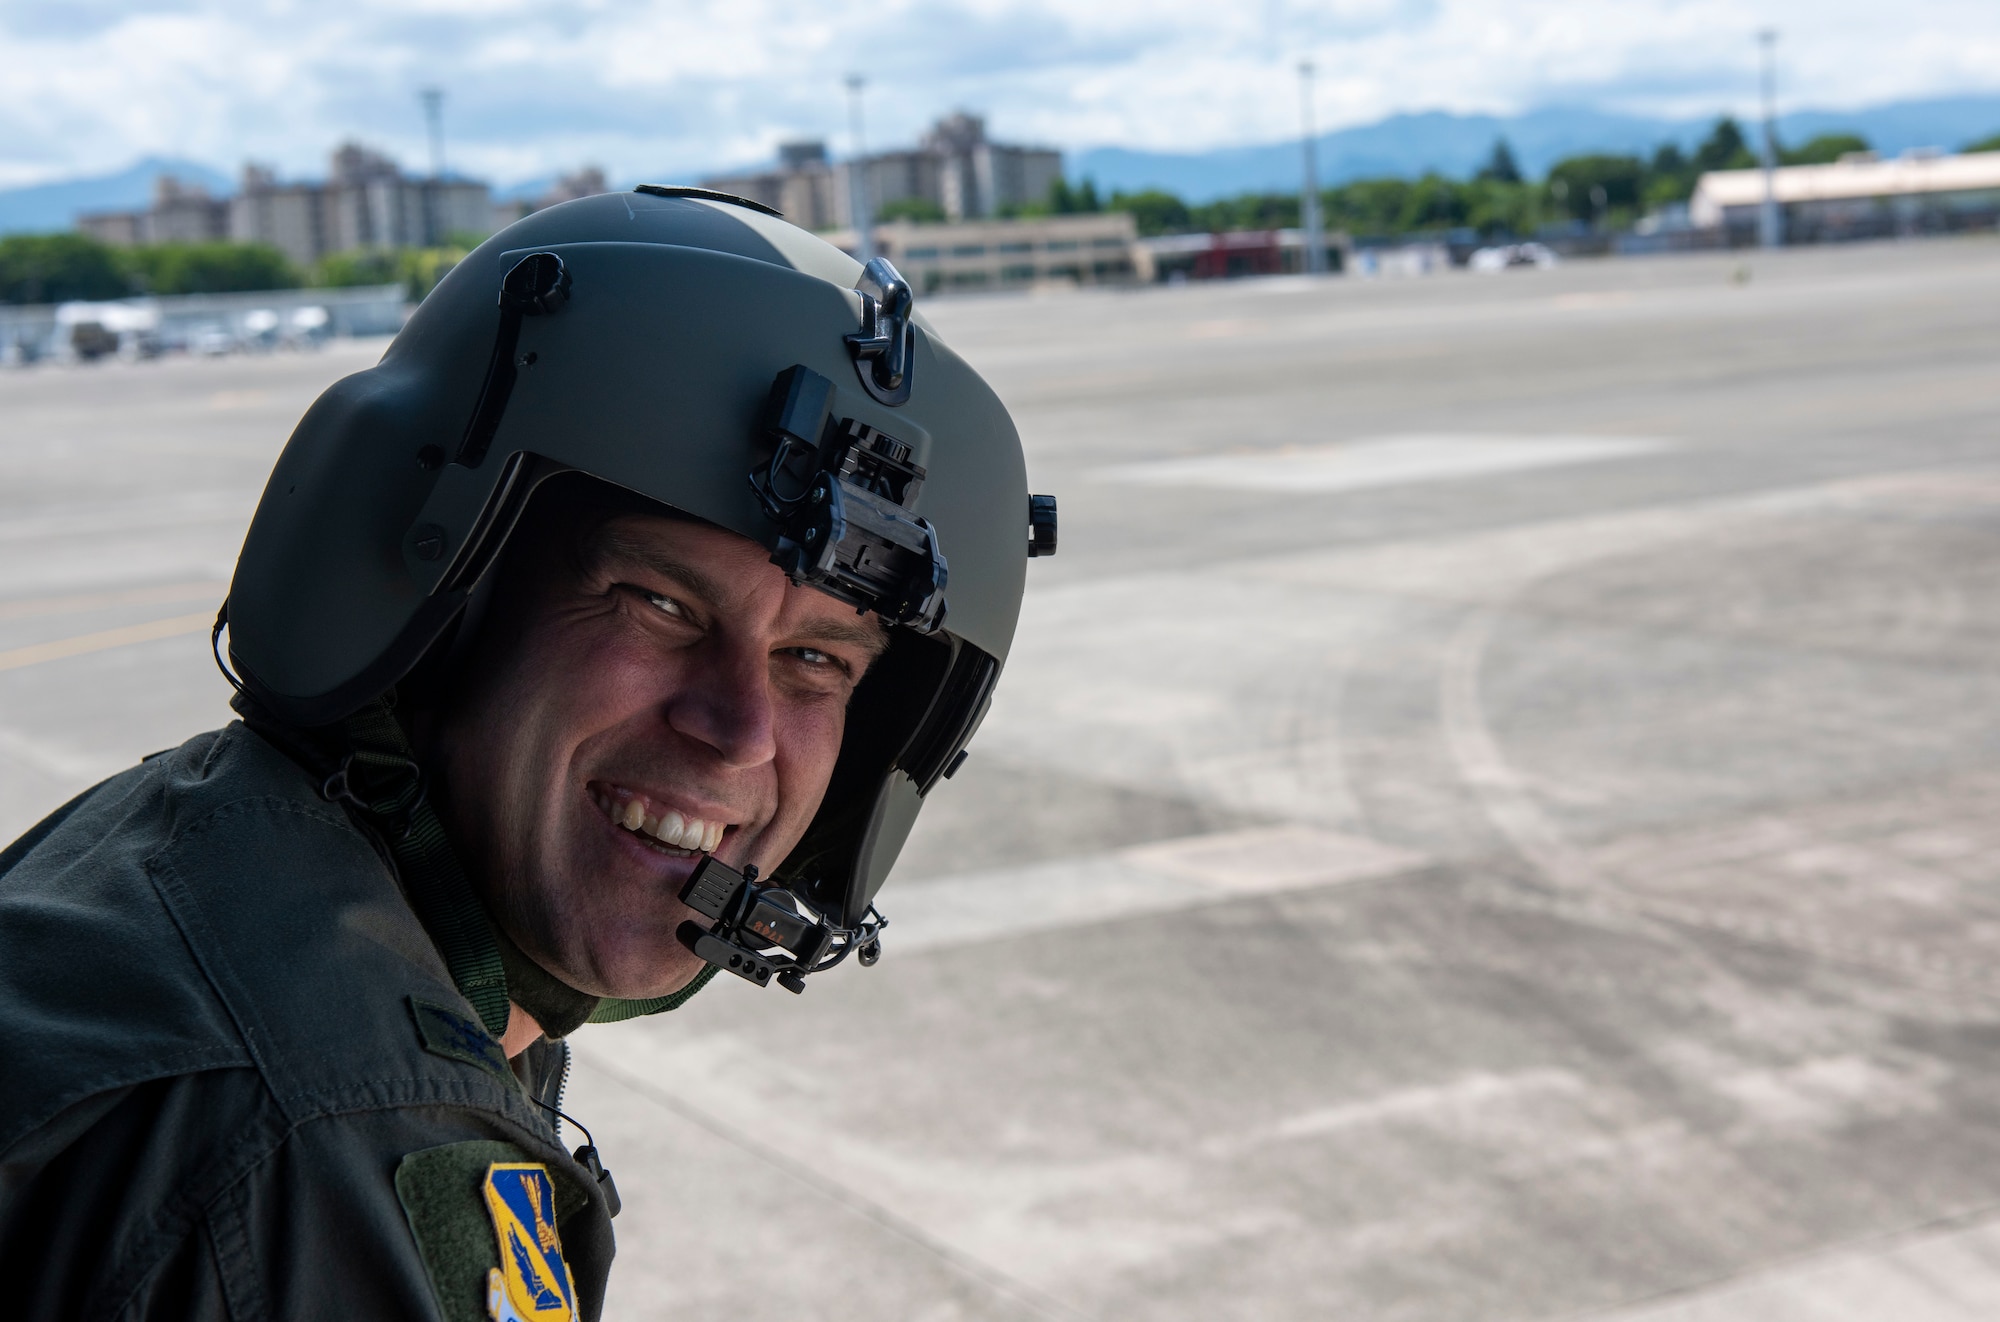 Col. Andrew Campbell, 374th Airlift Wing commander, smiles for a photo during Friendship Festival 2022, at Yokota Air Base, Japan May 22, 2022. The two-day festival was an opportunity for visitors to learn more about the U.S. and Japan bilateral partnership, while strengthening the bonds between Yokota and the local communities. Yokota was able to host the event with the support of Japan Self-Defense Force, sister services and the local community. (U.S. Air Force photo by Senior Airman Hannah Bean)